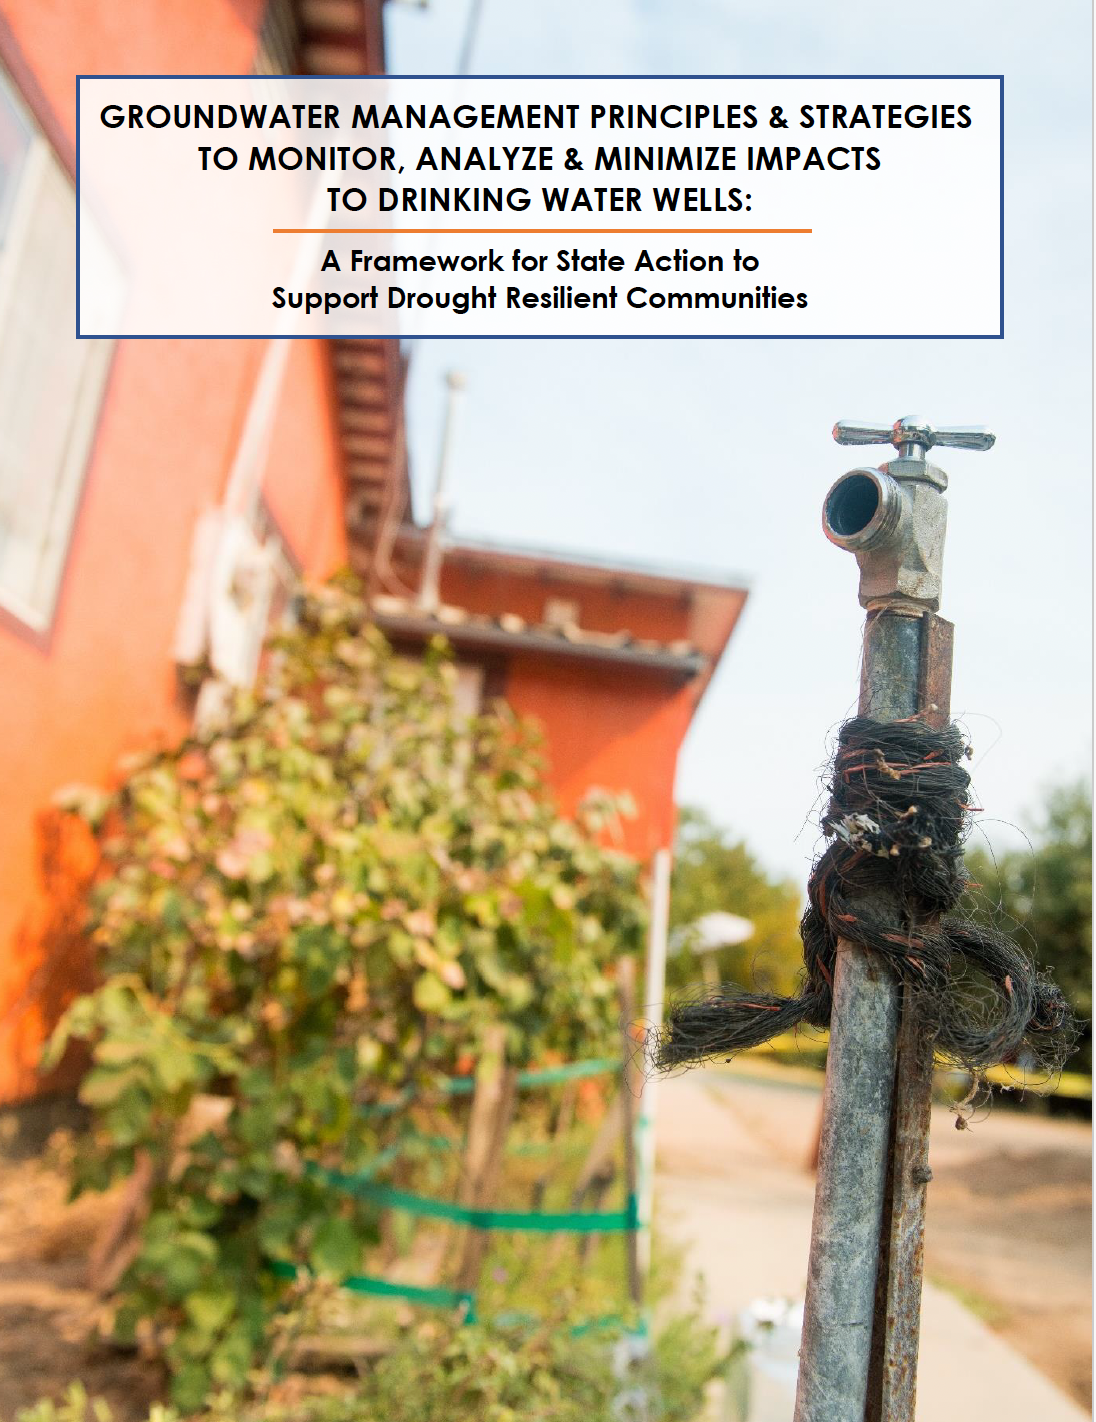 Groundwater Management Principles and Strategies to Monitor, Analyze and Minimize Impacts to Drinking Water Wells: A Framework for State Action to Support Drought Resilient Communities